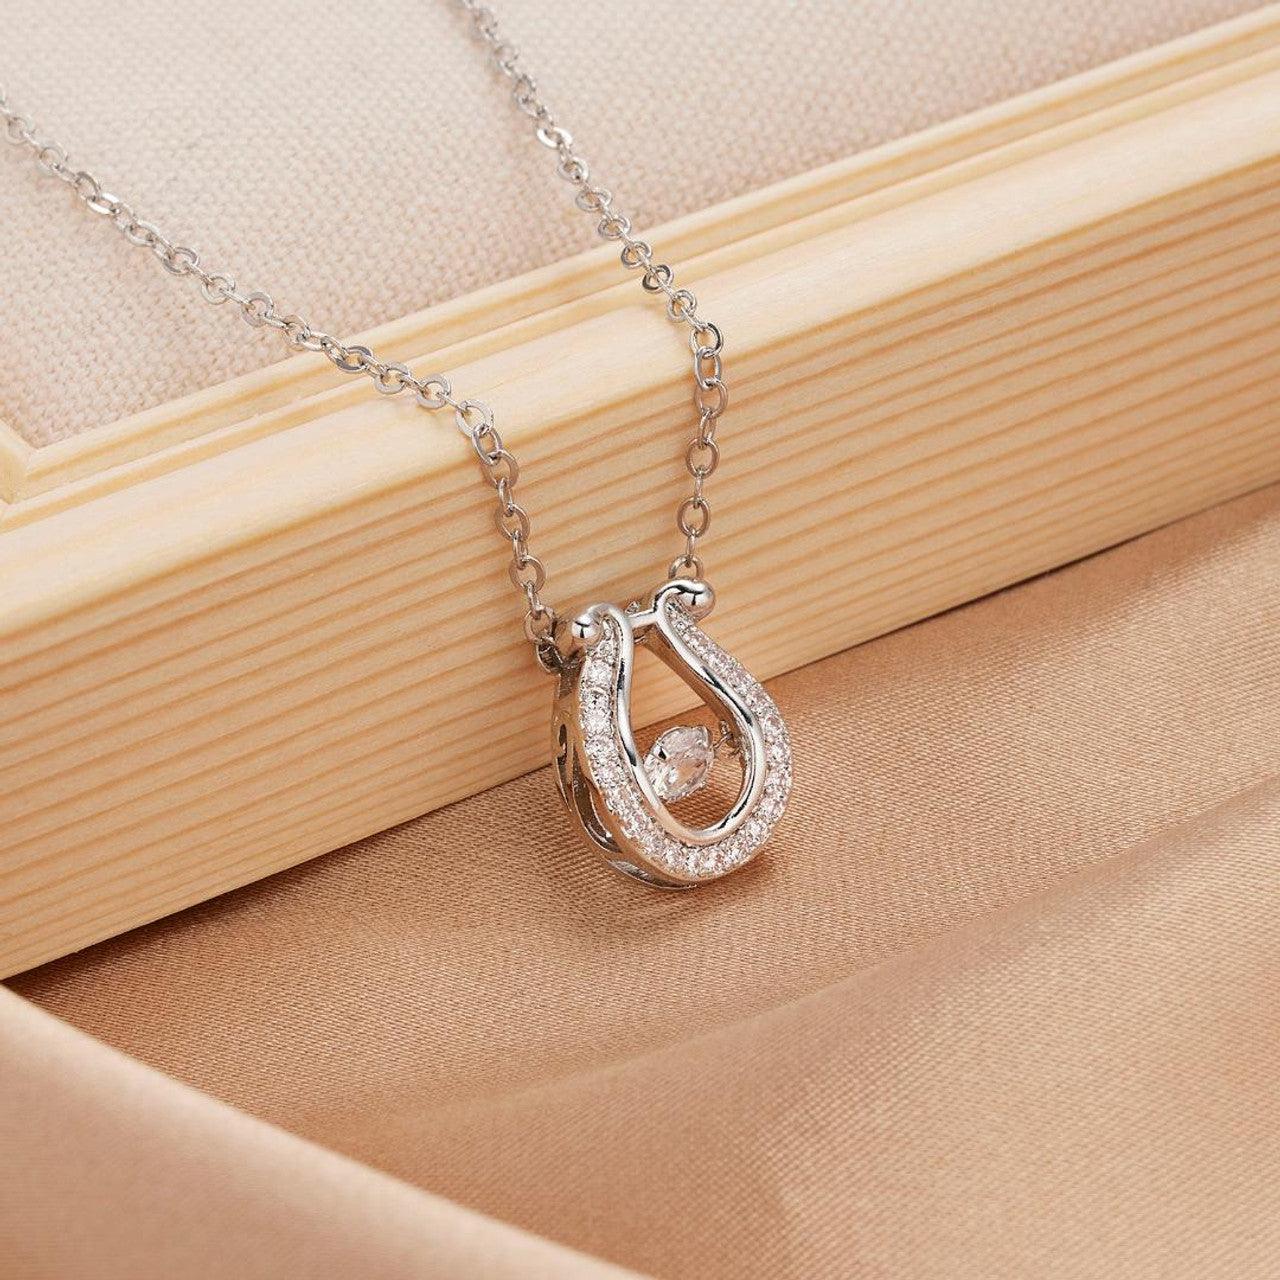 Horseshoe Necklace with Floating Crystal - J & S Expressions